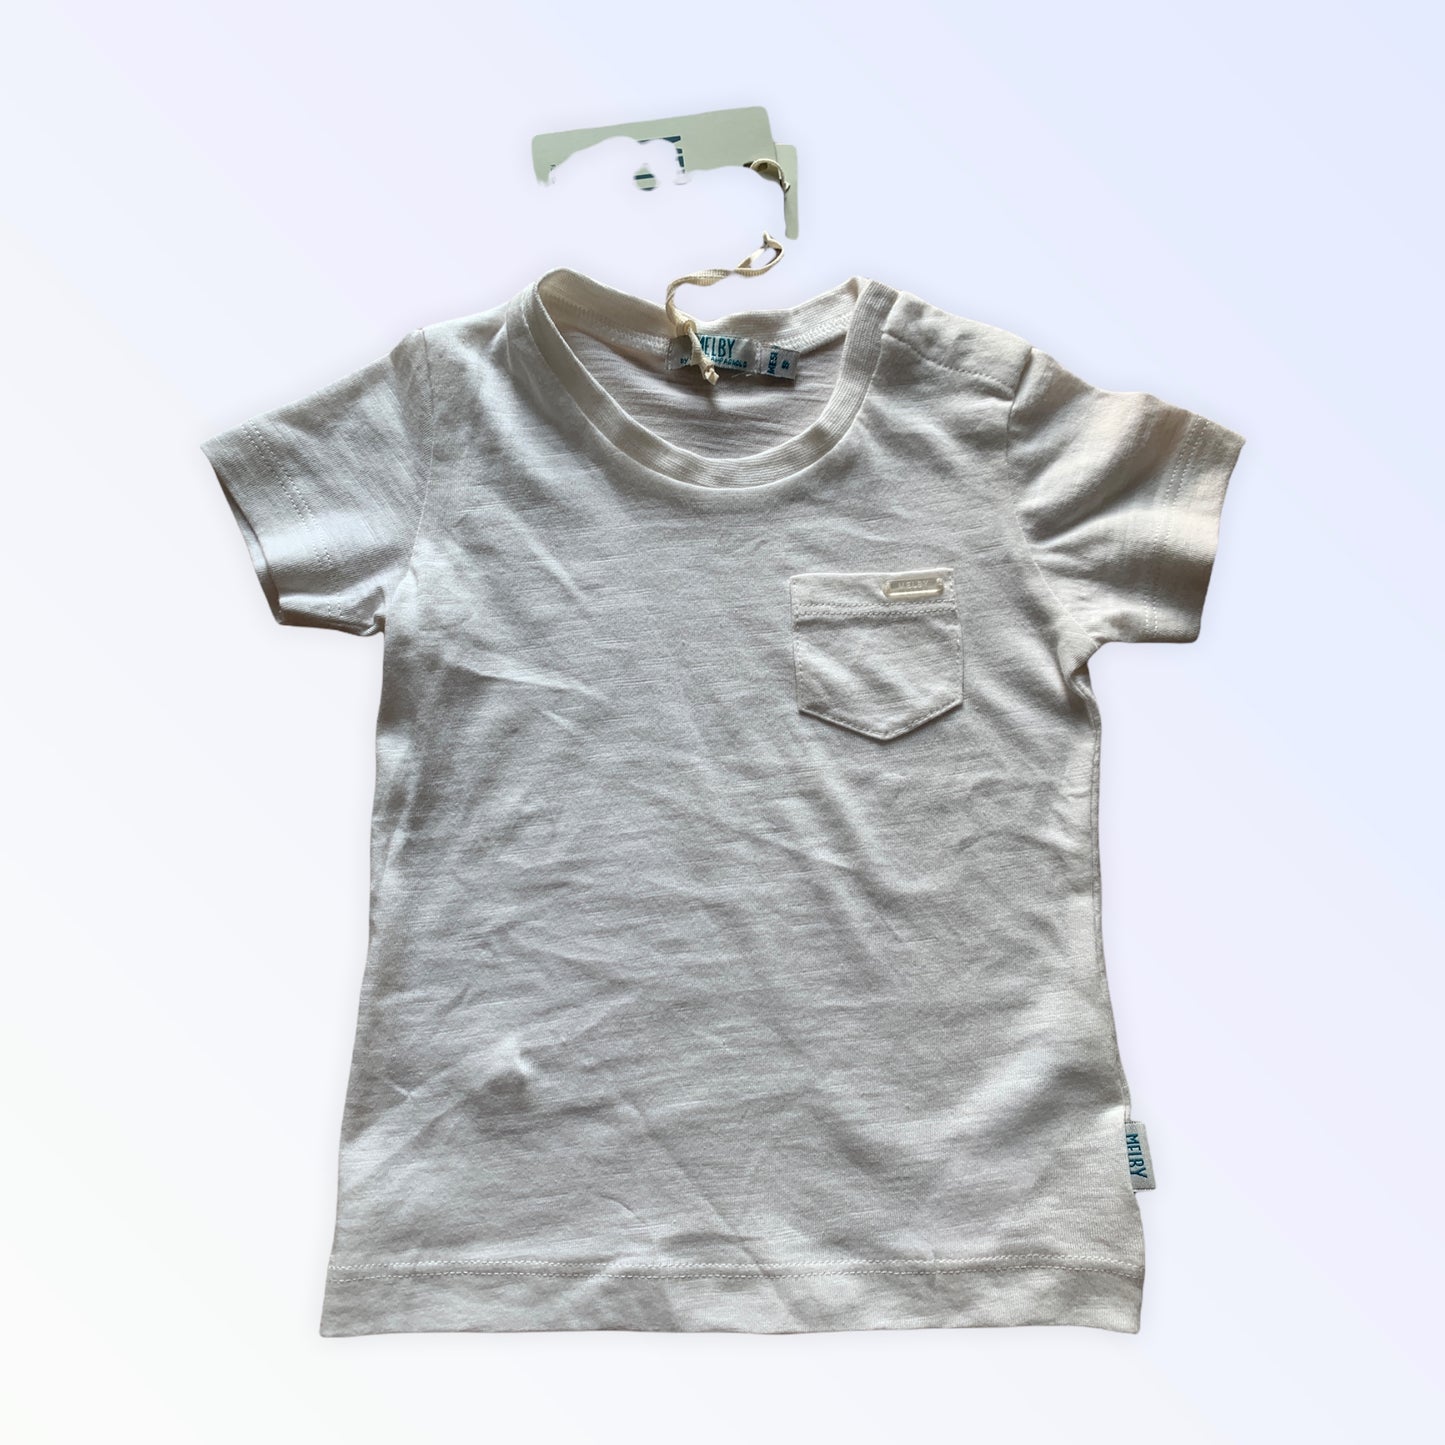 Melby 9 month new baby white t-shirt